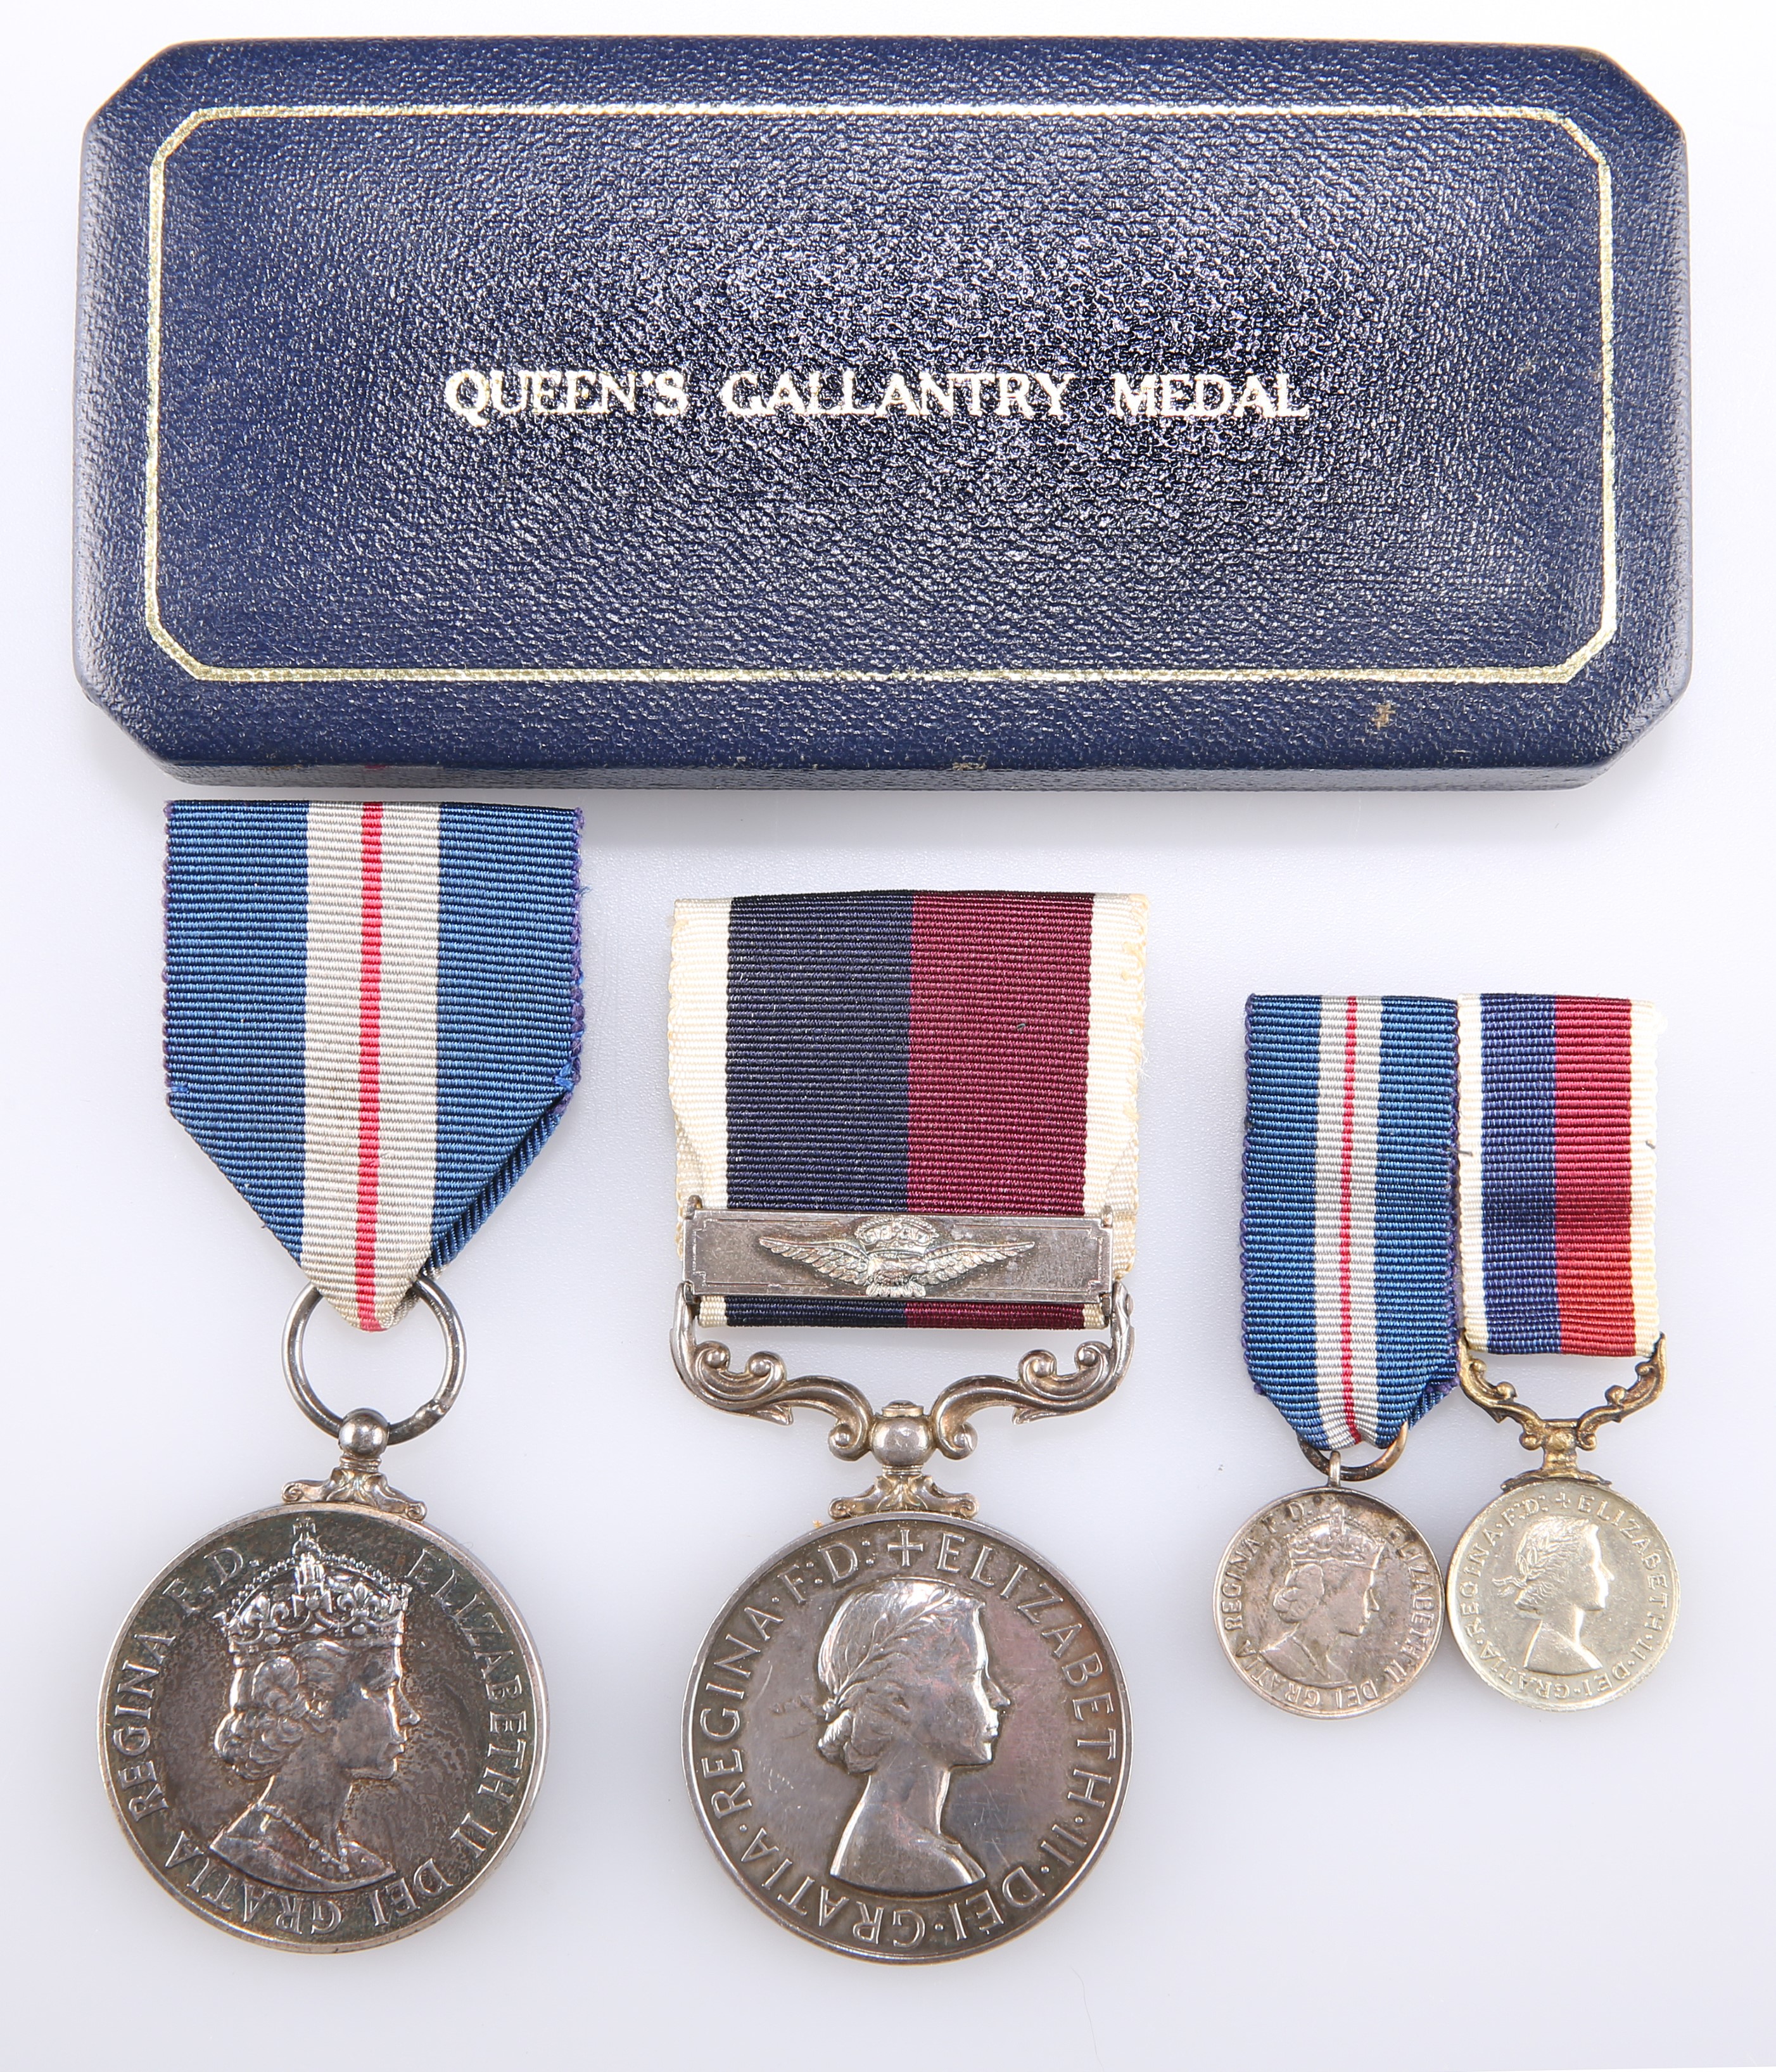 AN IMPORTANT EARLY ISSUE QUEEN'S GALLANTRY MEDAL